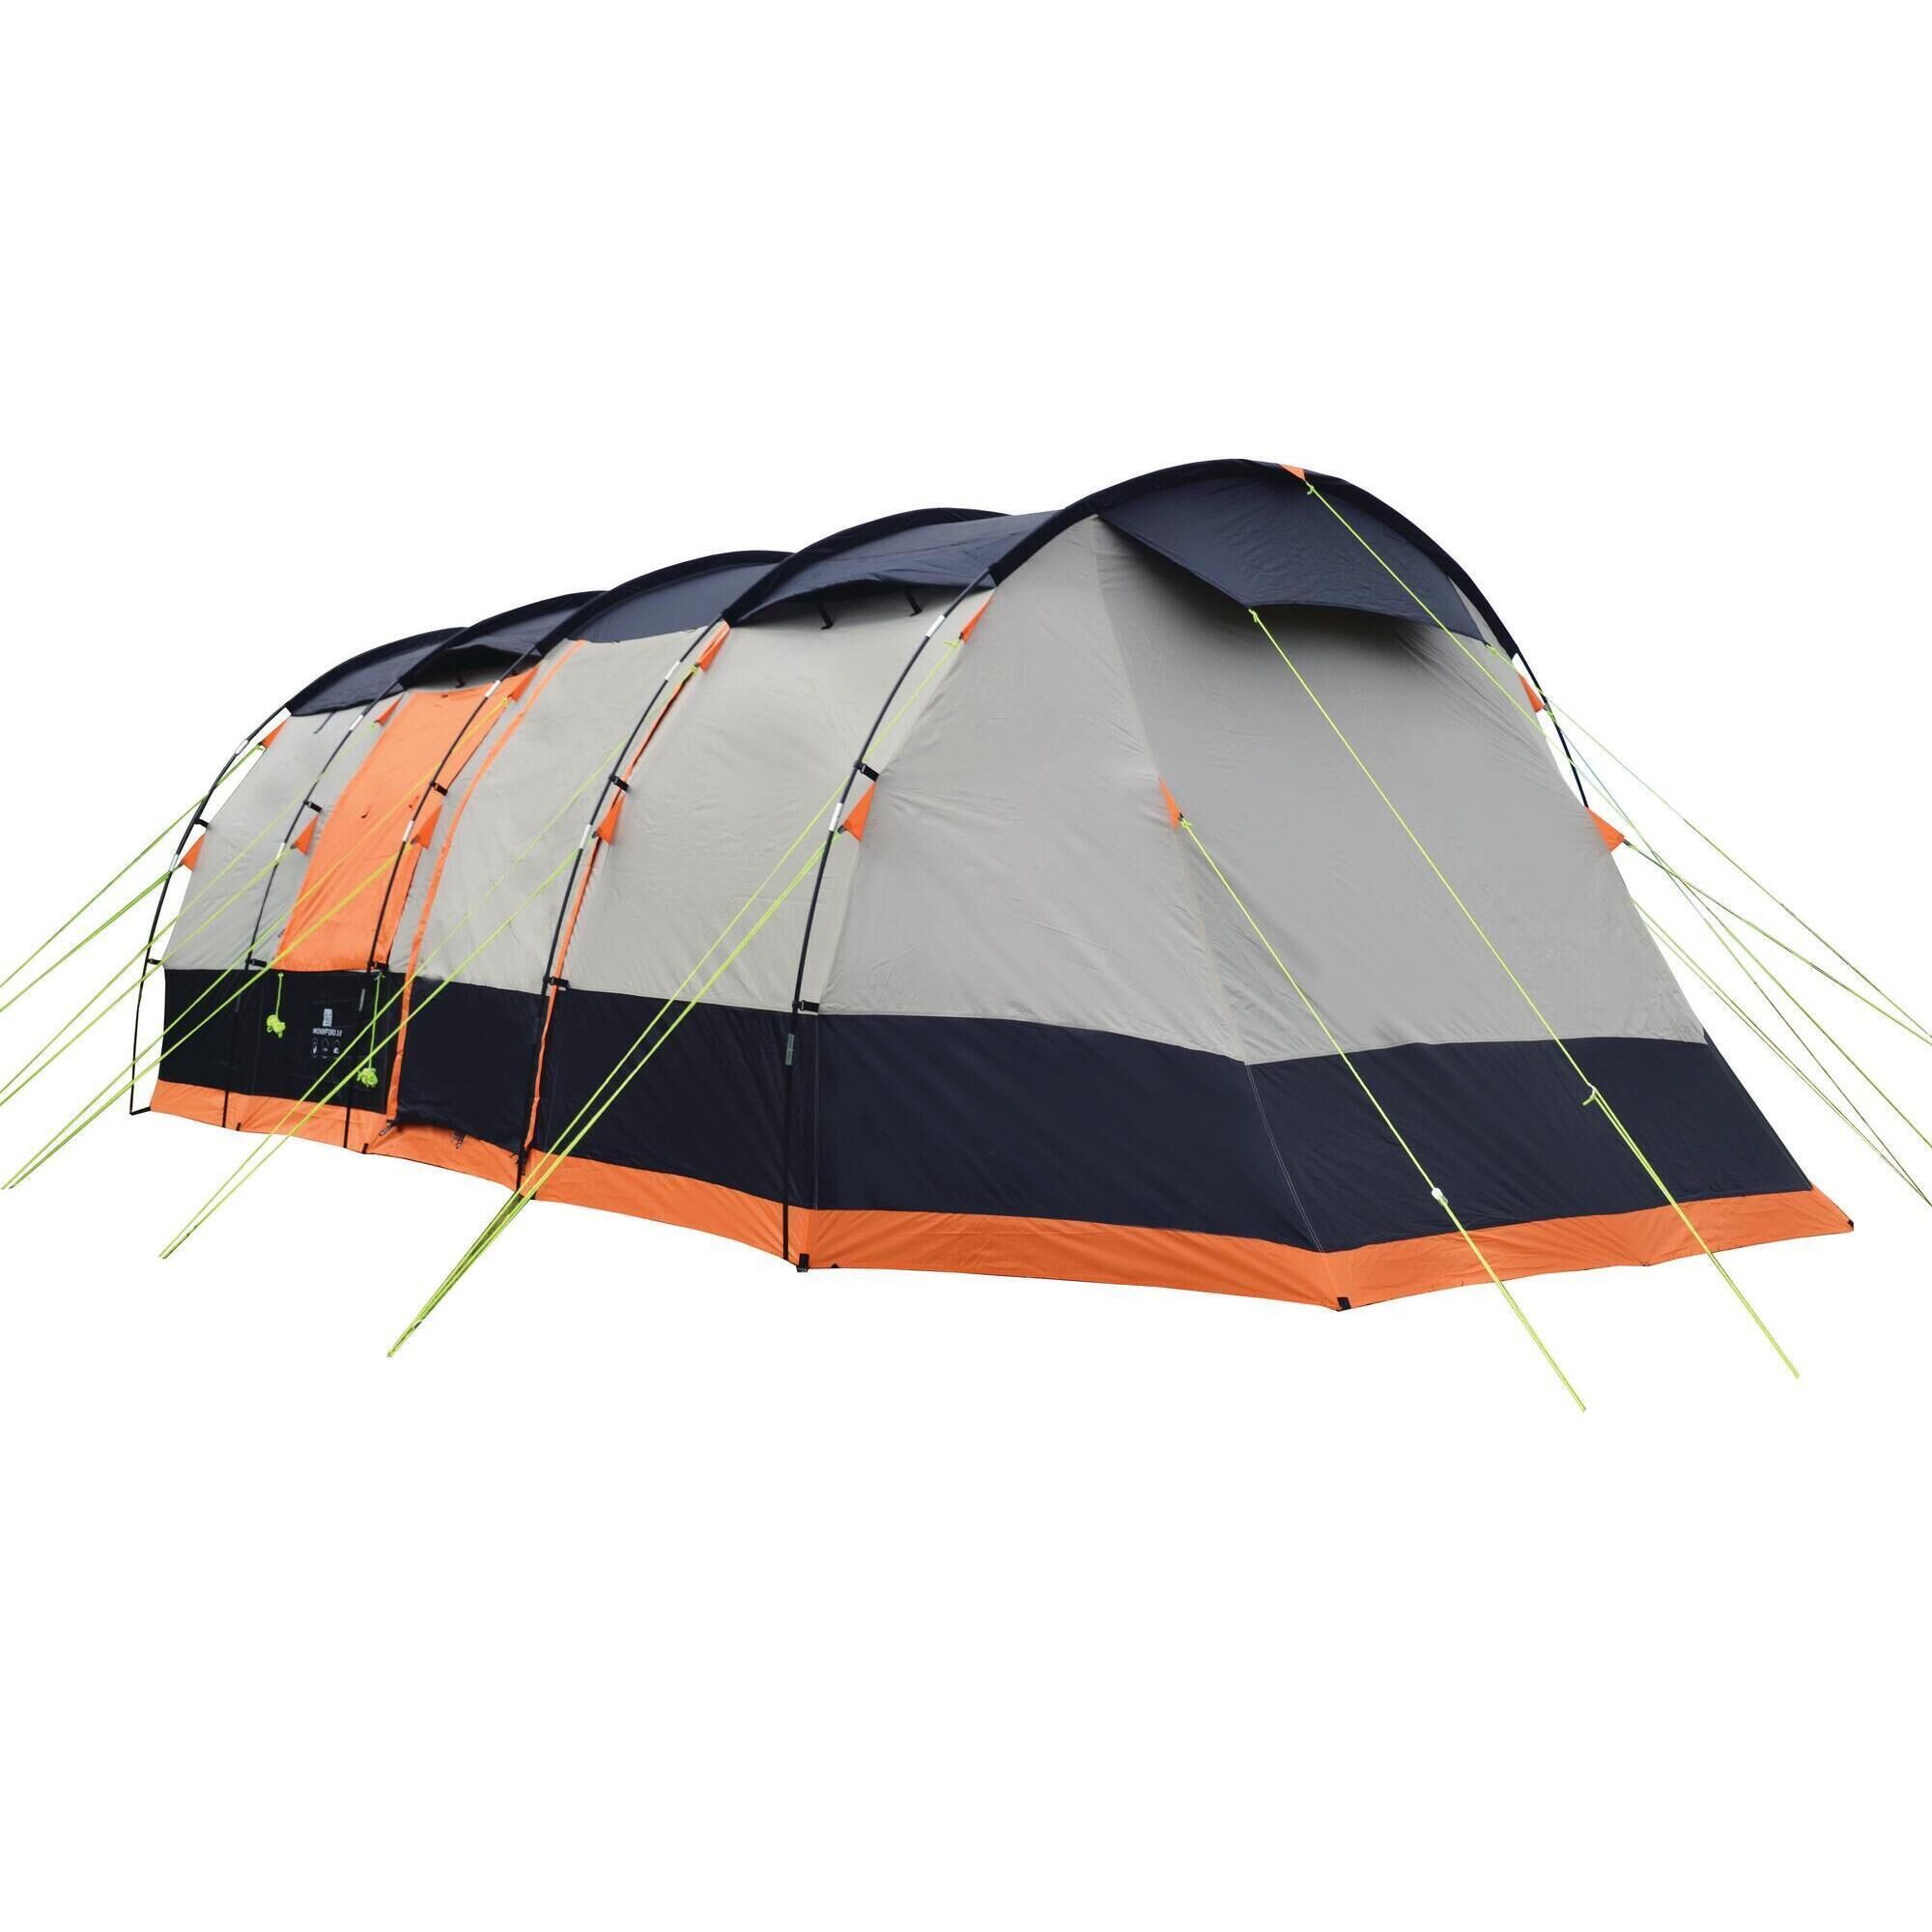 OLPRO OLPRO Wichenford 3.0 8 Berth Tent